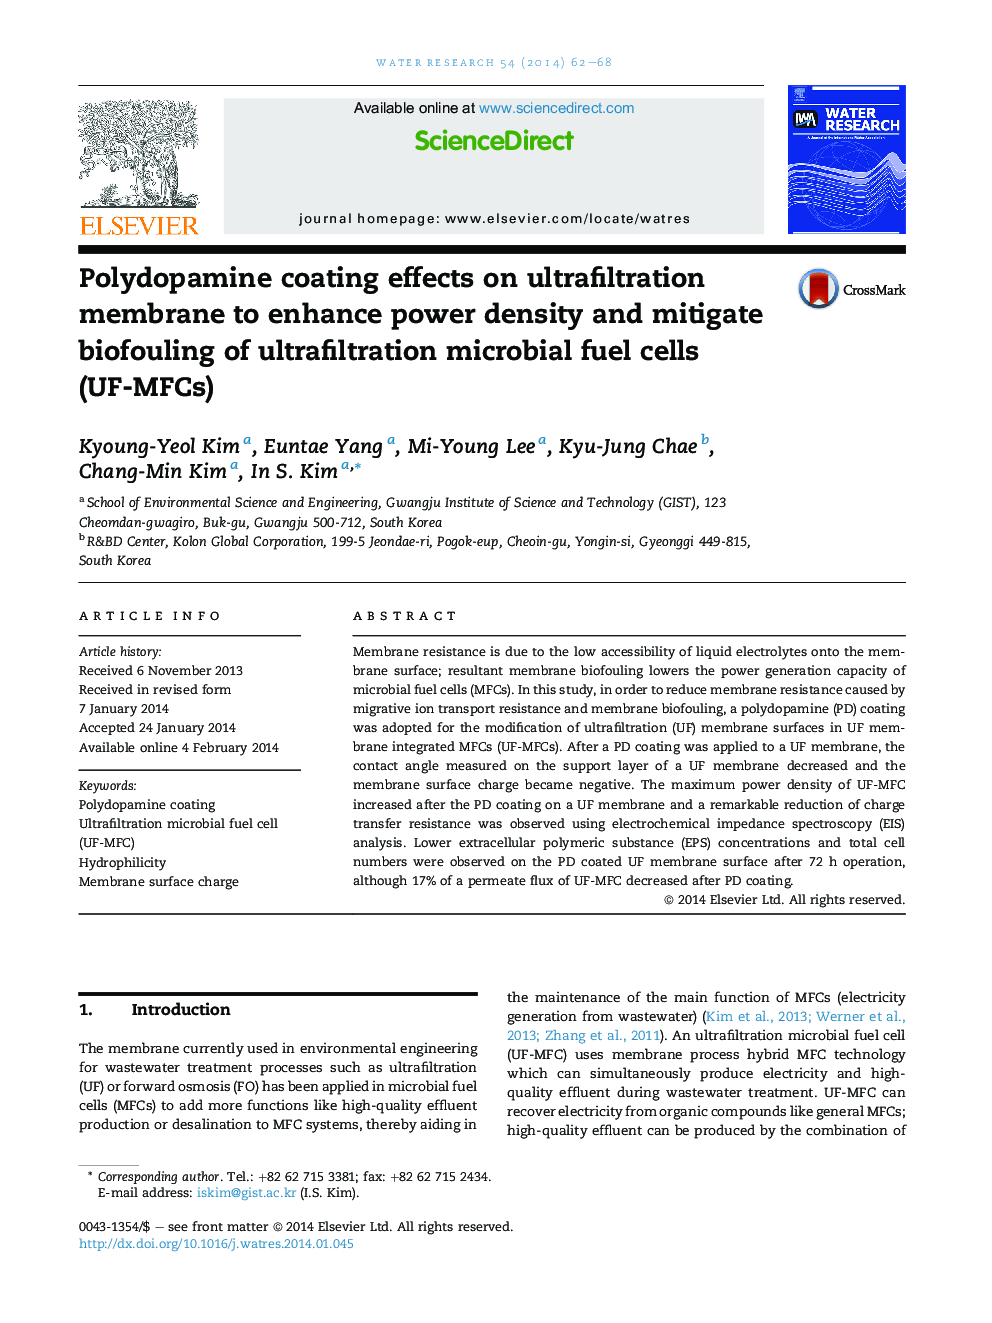 Polydopamine coating effects on ultrafiltration membrane to enhance power density and mitigate biofouling of ultrafiltration microbial fuel cells (UF-MFCs)